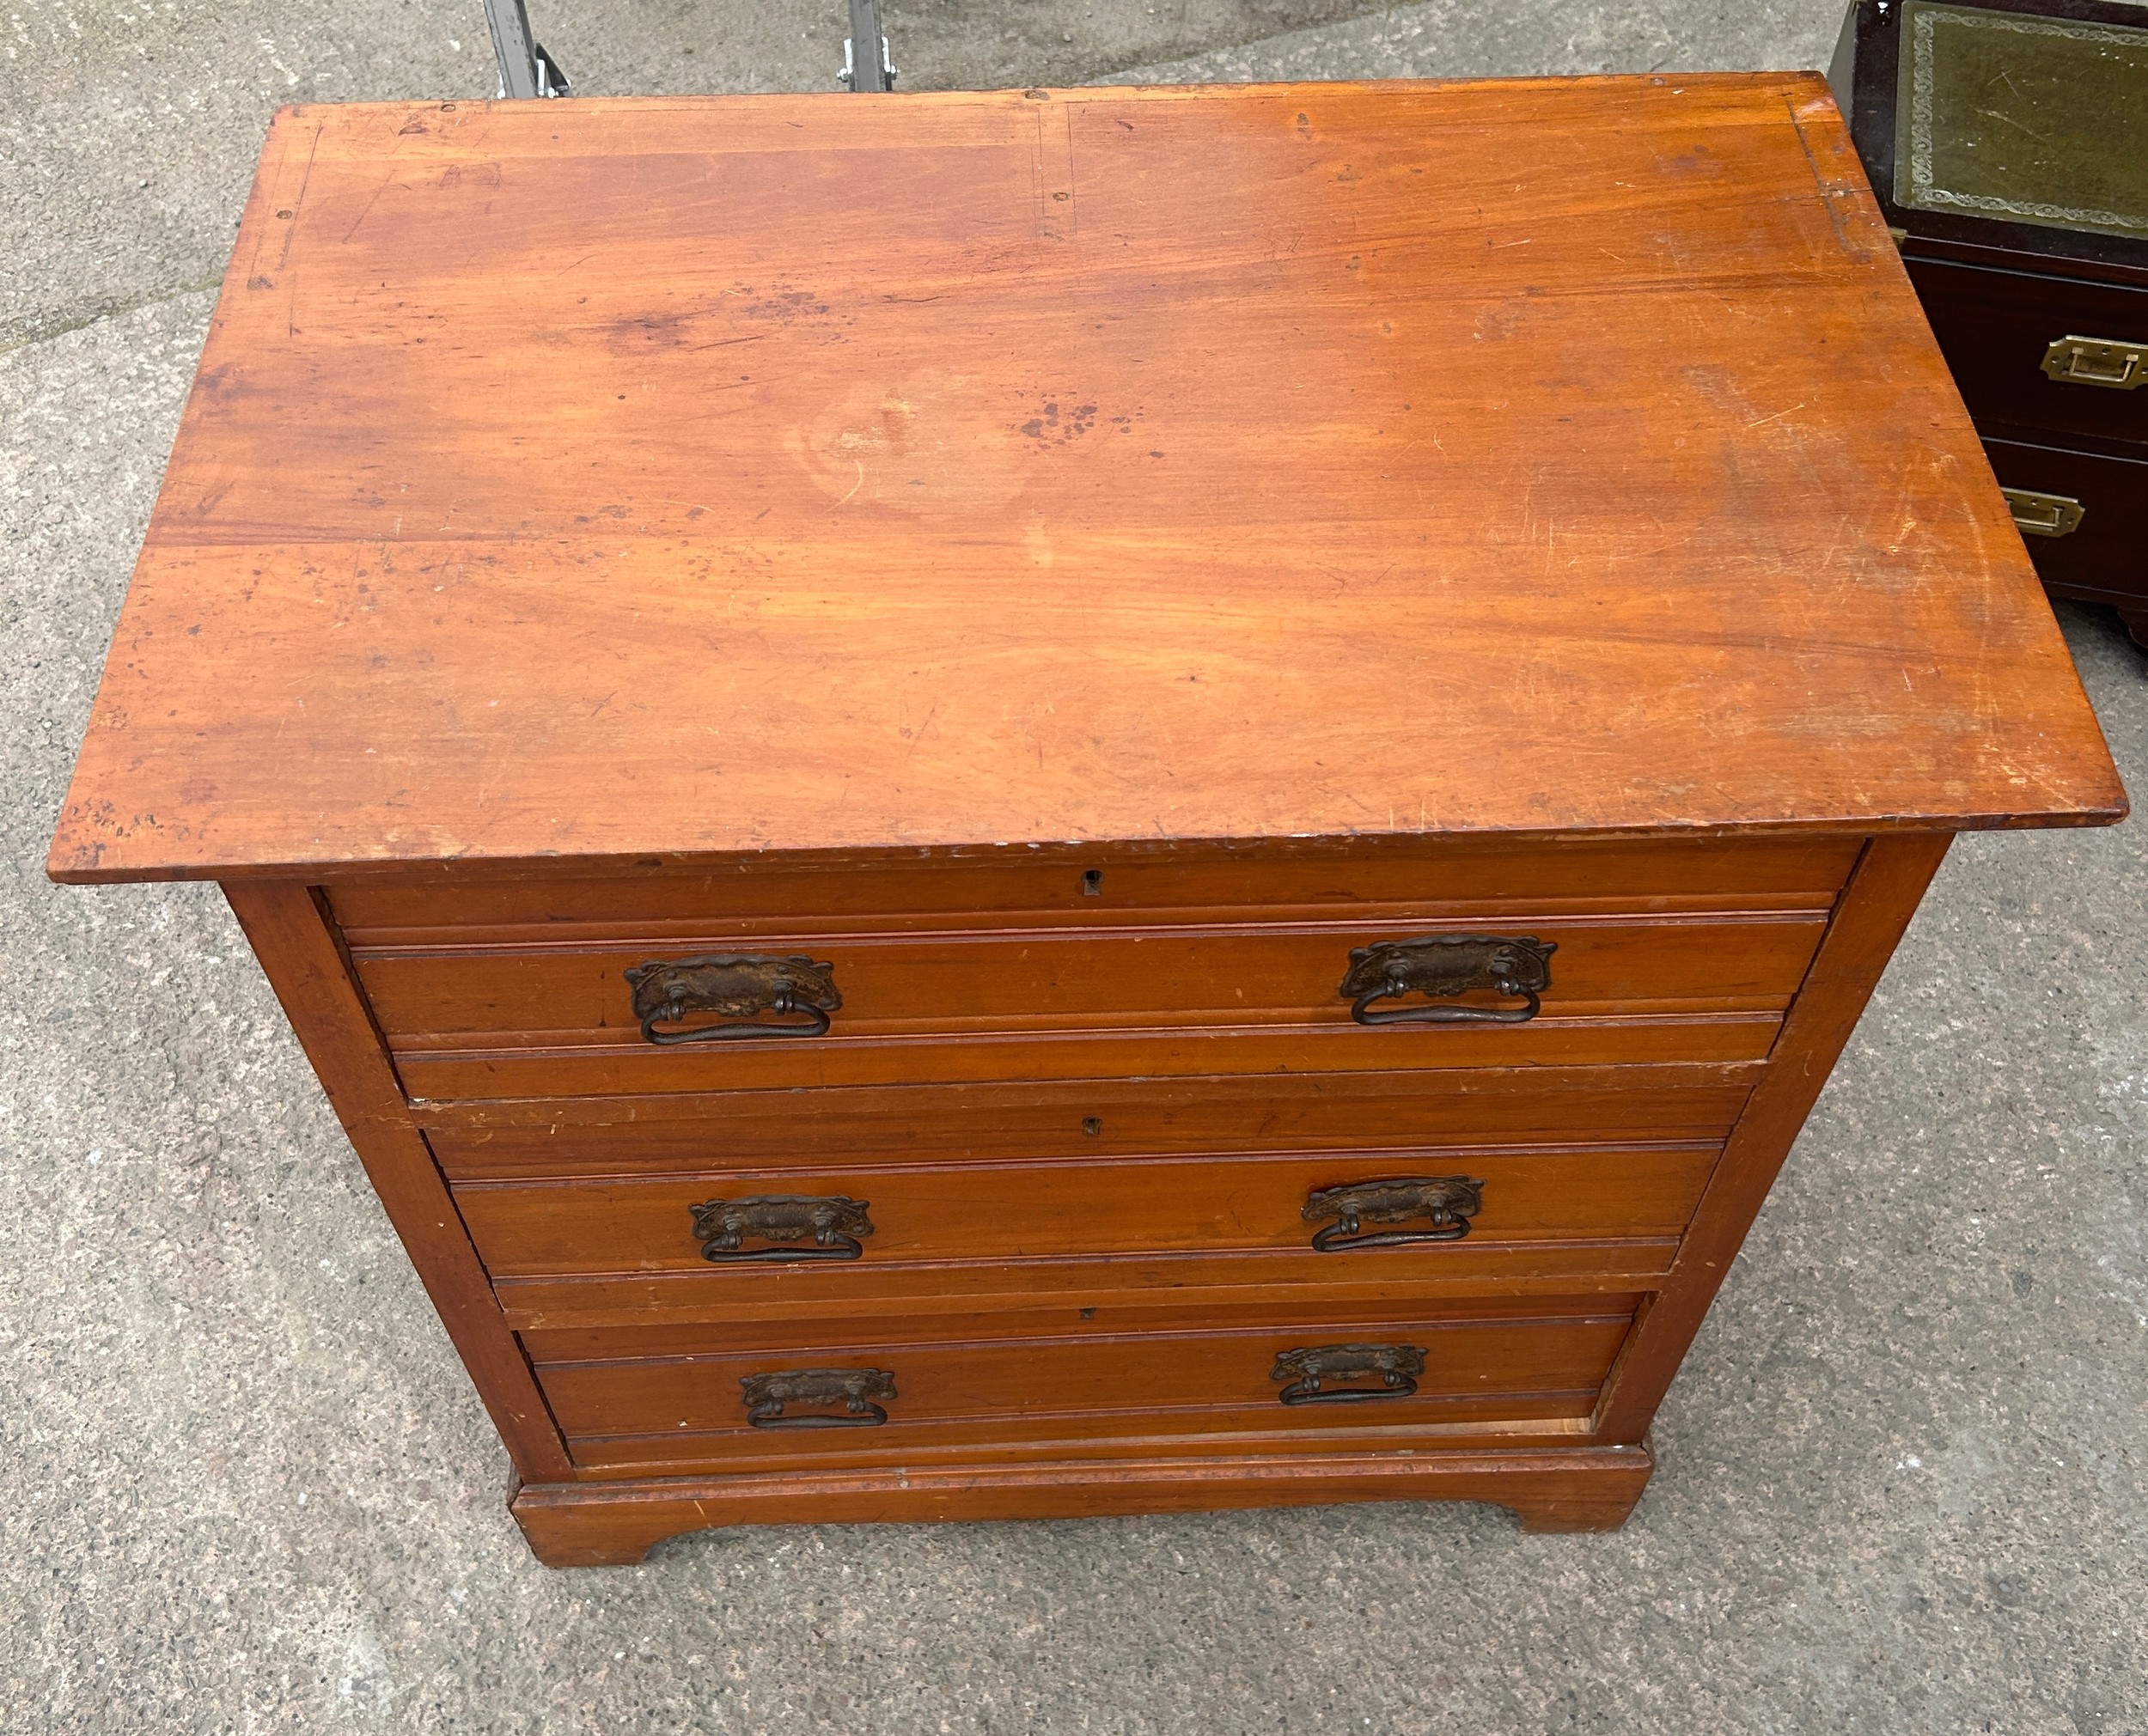 three drawer satin wood chest measures approx 33 inches tall, 33 wide and 20 deep - Image 2 of 2